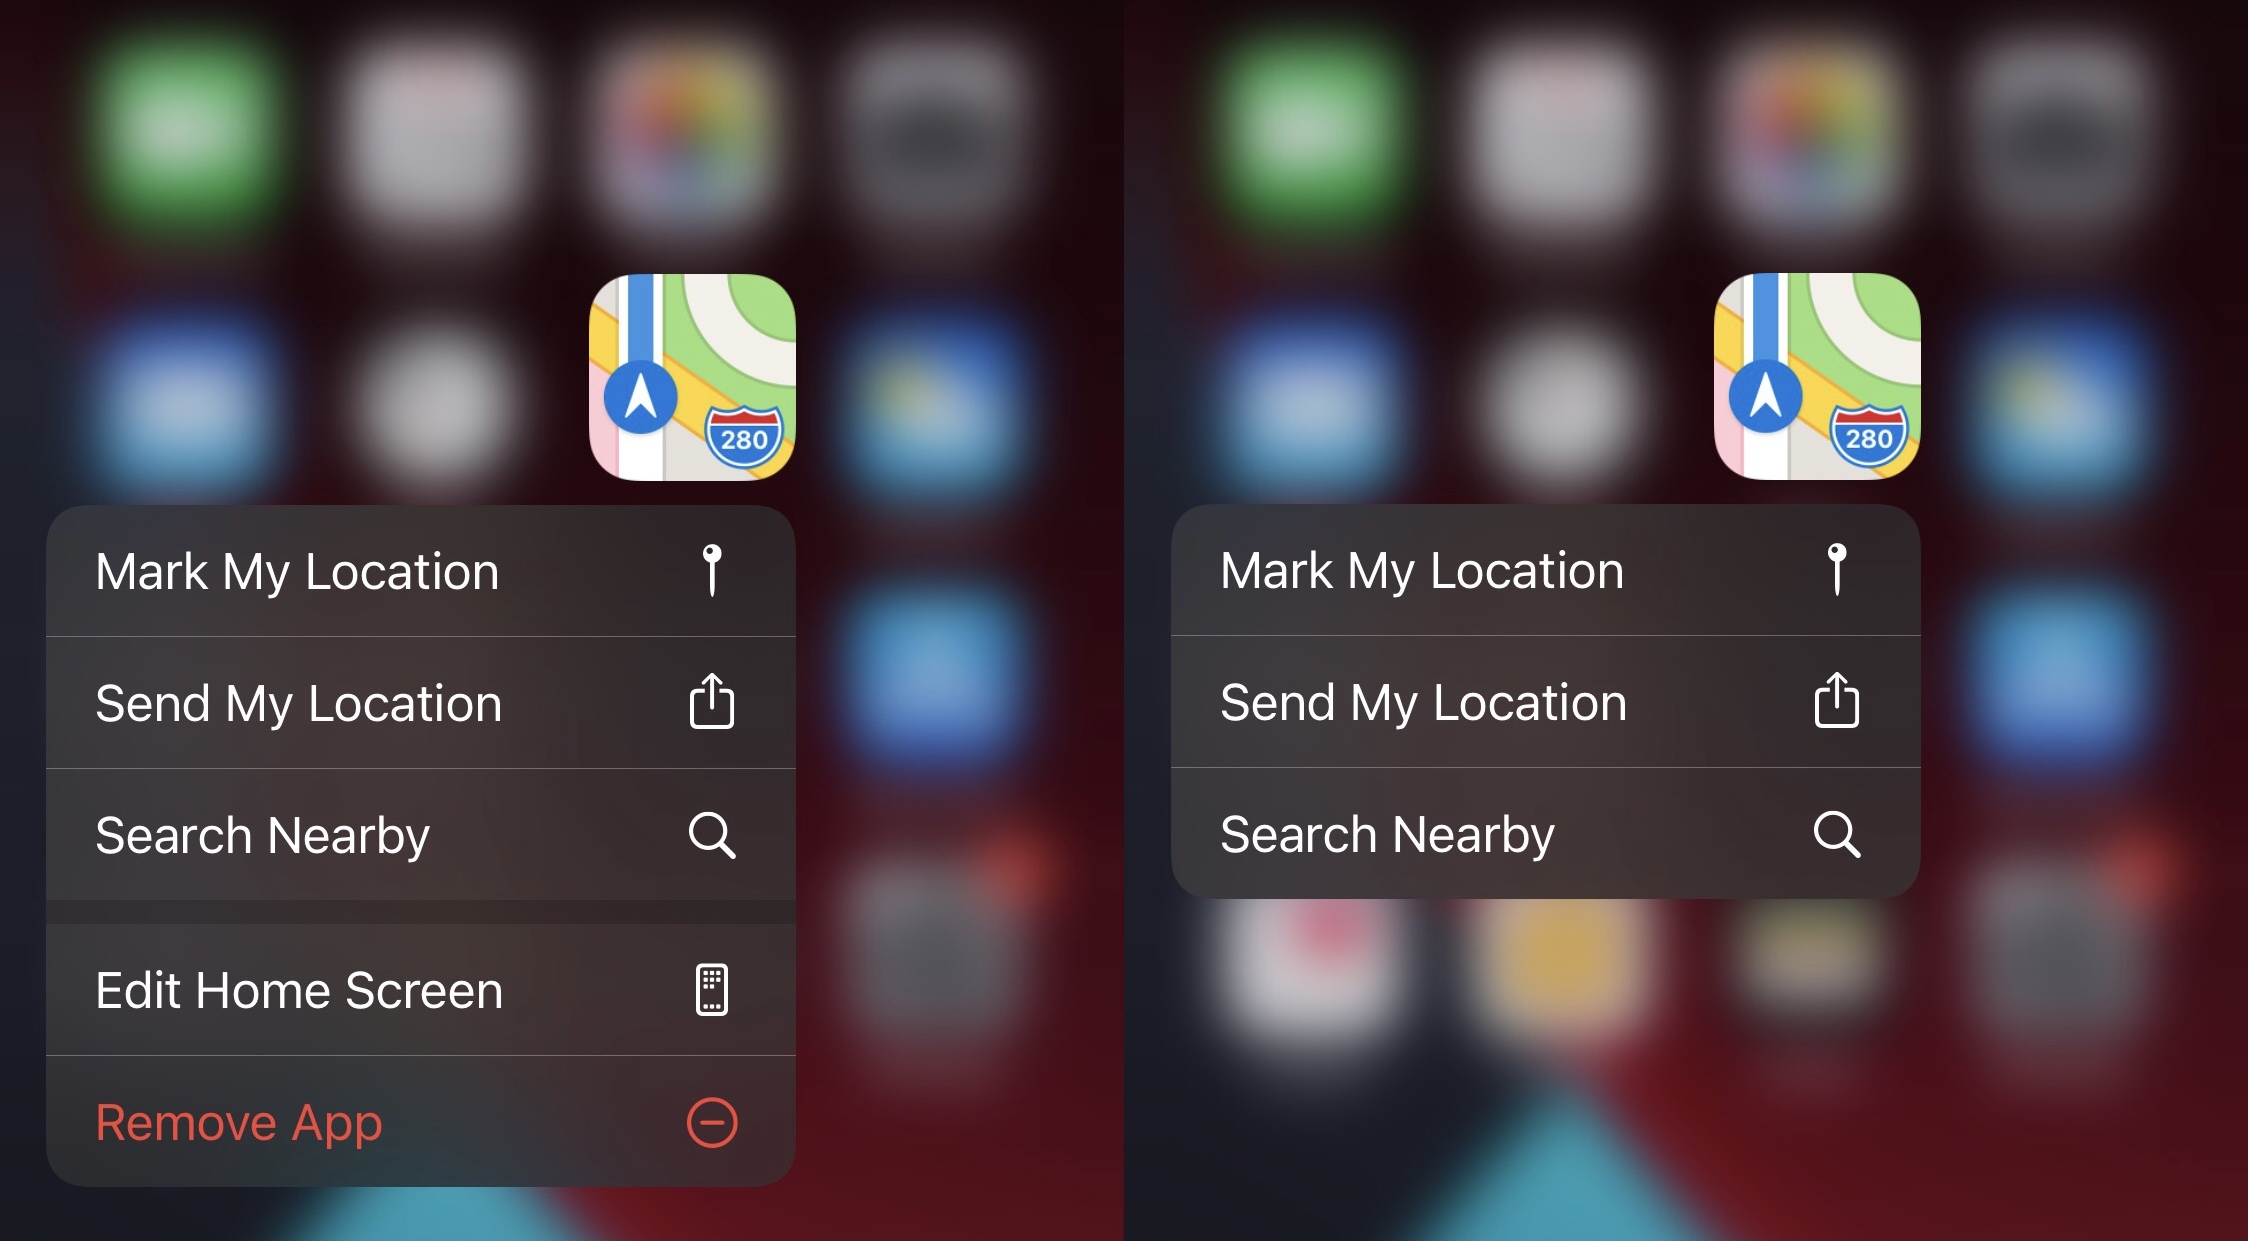 Remove junk from Home Screen 3D Touch menus.